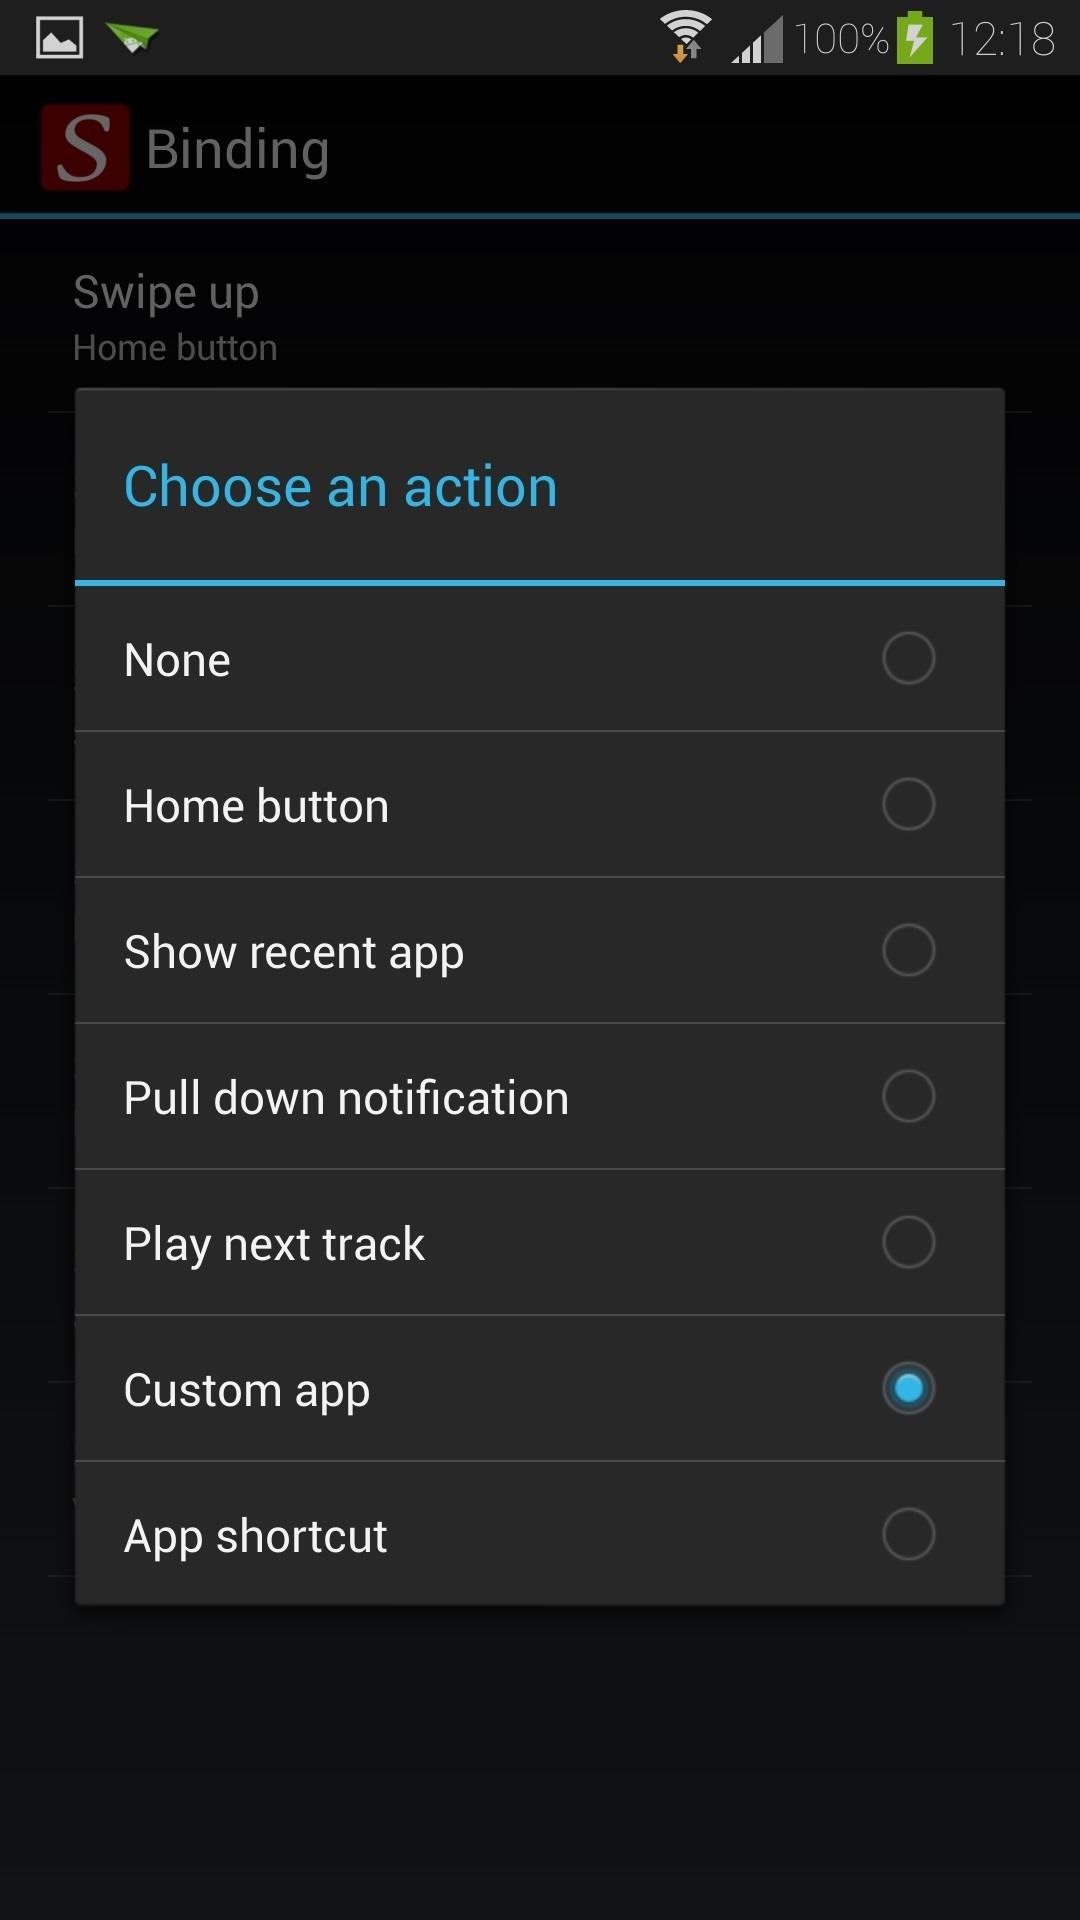 How to Replace Your Samsung Galaxy S4's Home Button with Customizable Swipe Gestures